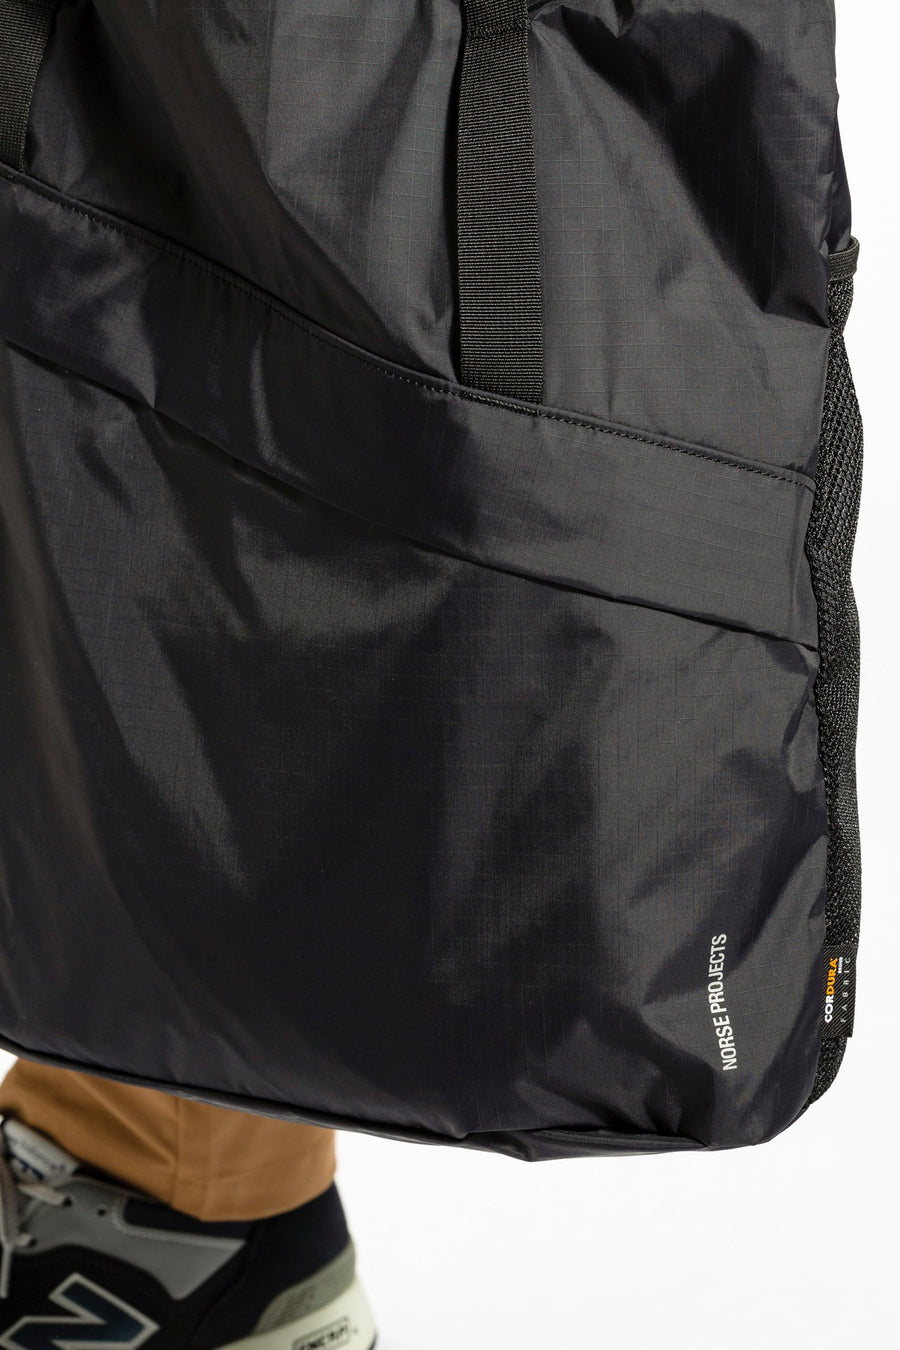 Norse Project Ripstop Tote Cordura Black OS detail 2